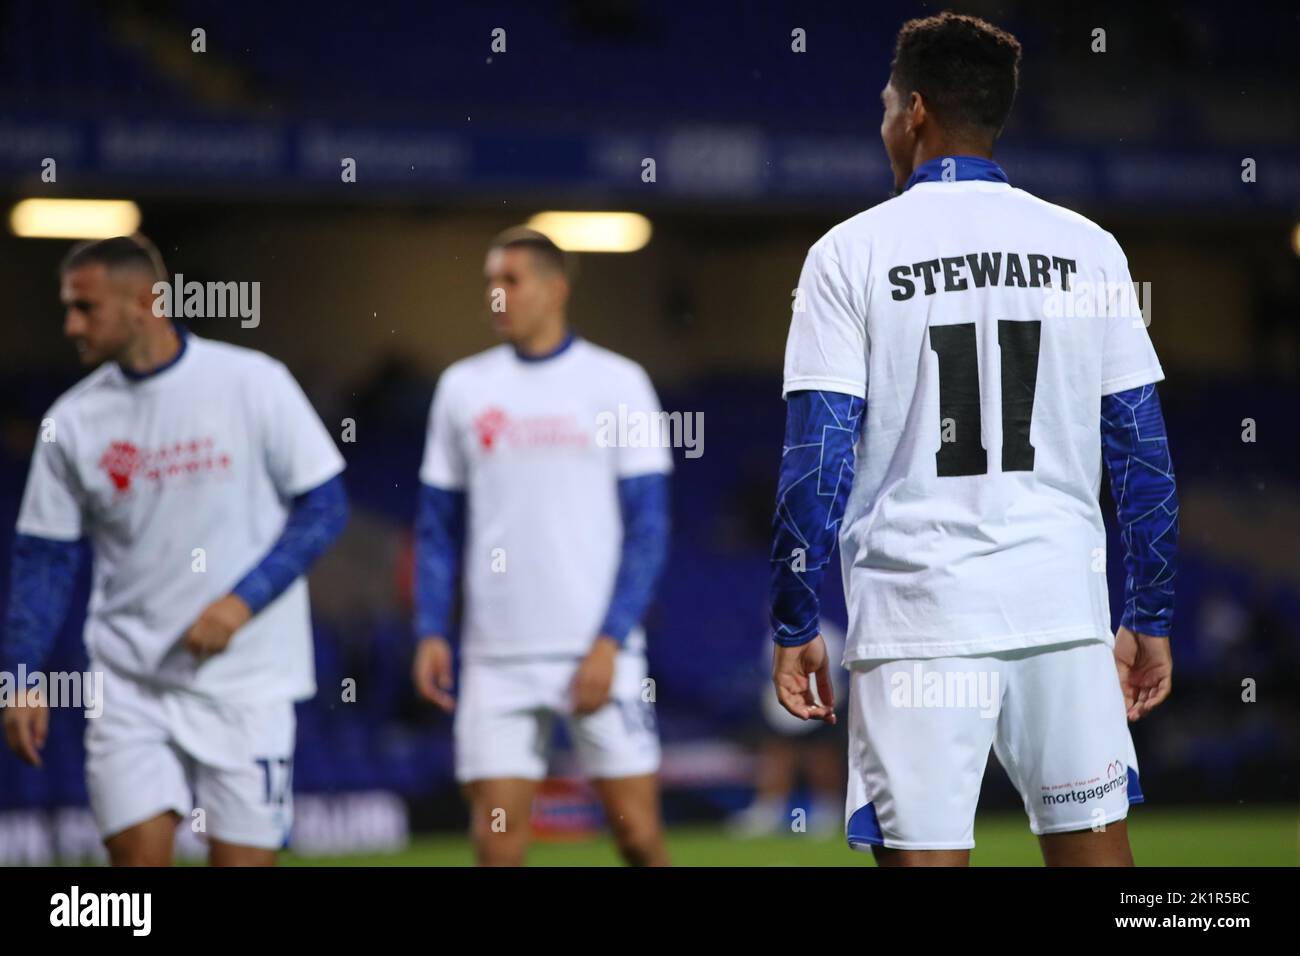 Tyreece John-Jules of Ipswich Town warms up wearing t-shirt in support of former player Marcus Stewart who recently diagnosed with Motor Neurone Disease (MND)- Ipswich Town v Bristol Rovers, Sky Bet League One, Portman Road, Ipswich, UK - 13th September 2022  Editorial Use Only - DataCo restrictions apply Stock Photo